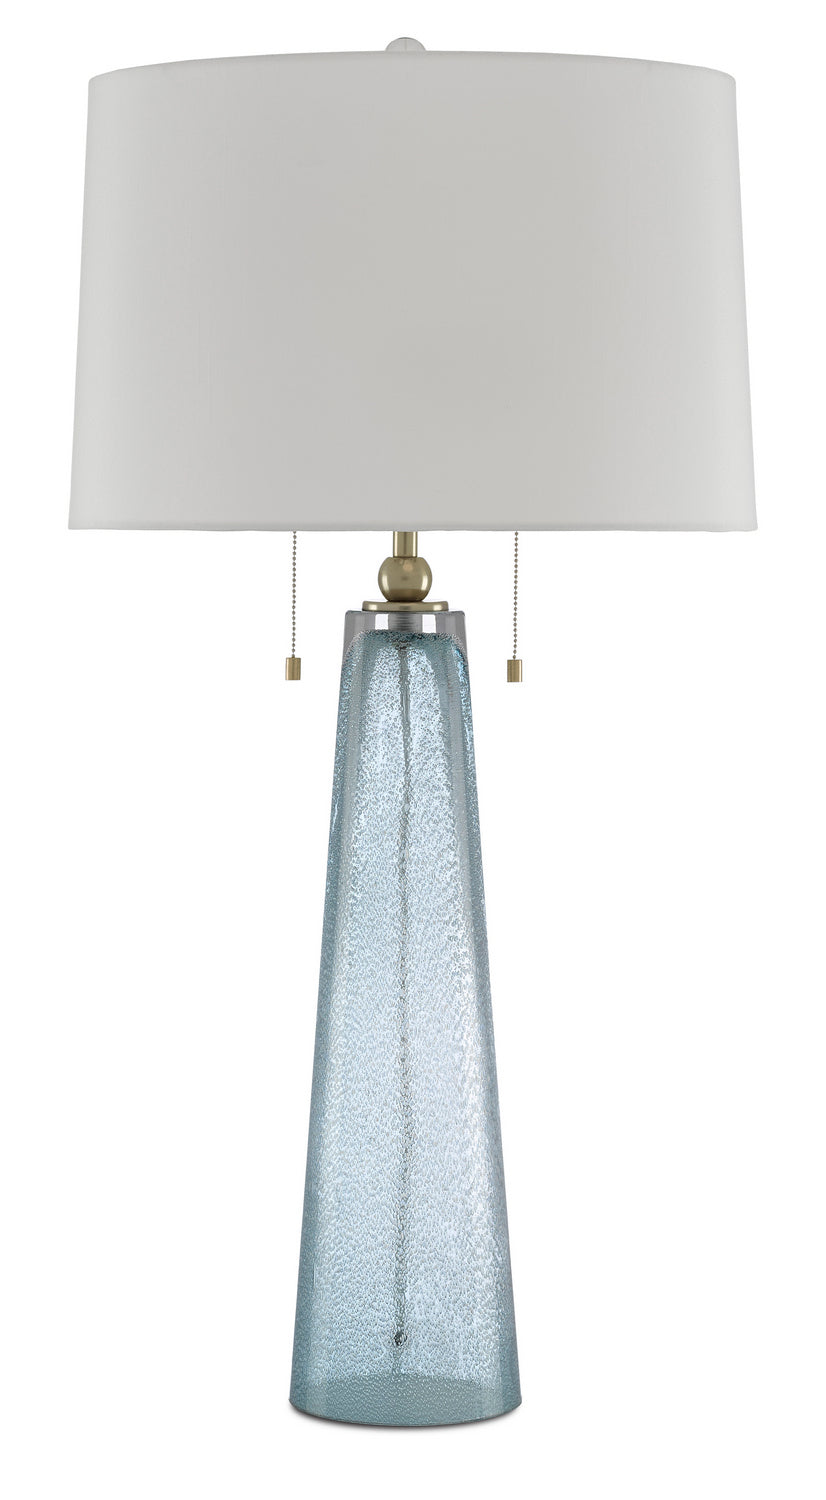 Two Light Table Lamp from the Looke collection in Blue/Brass finish